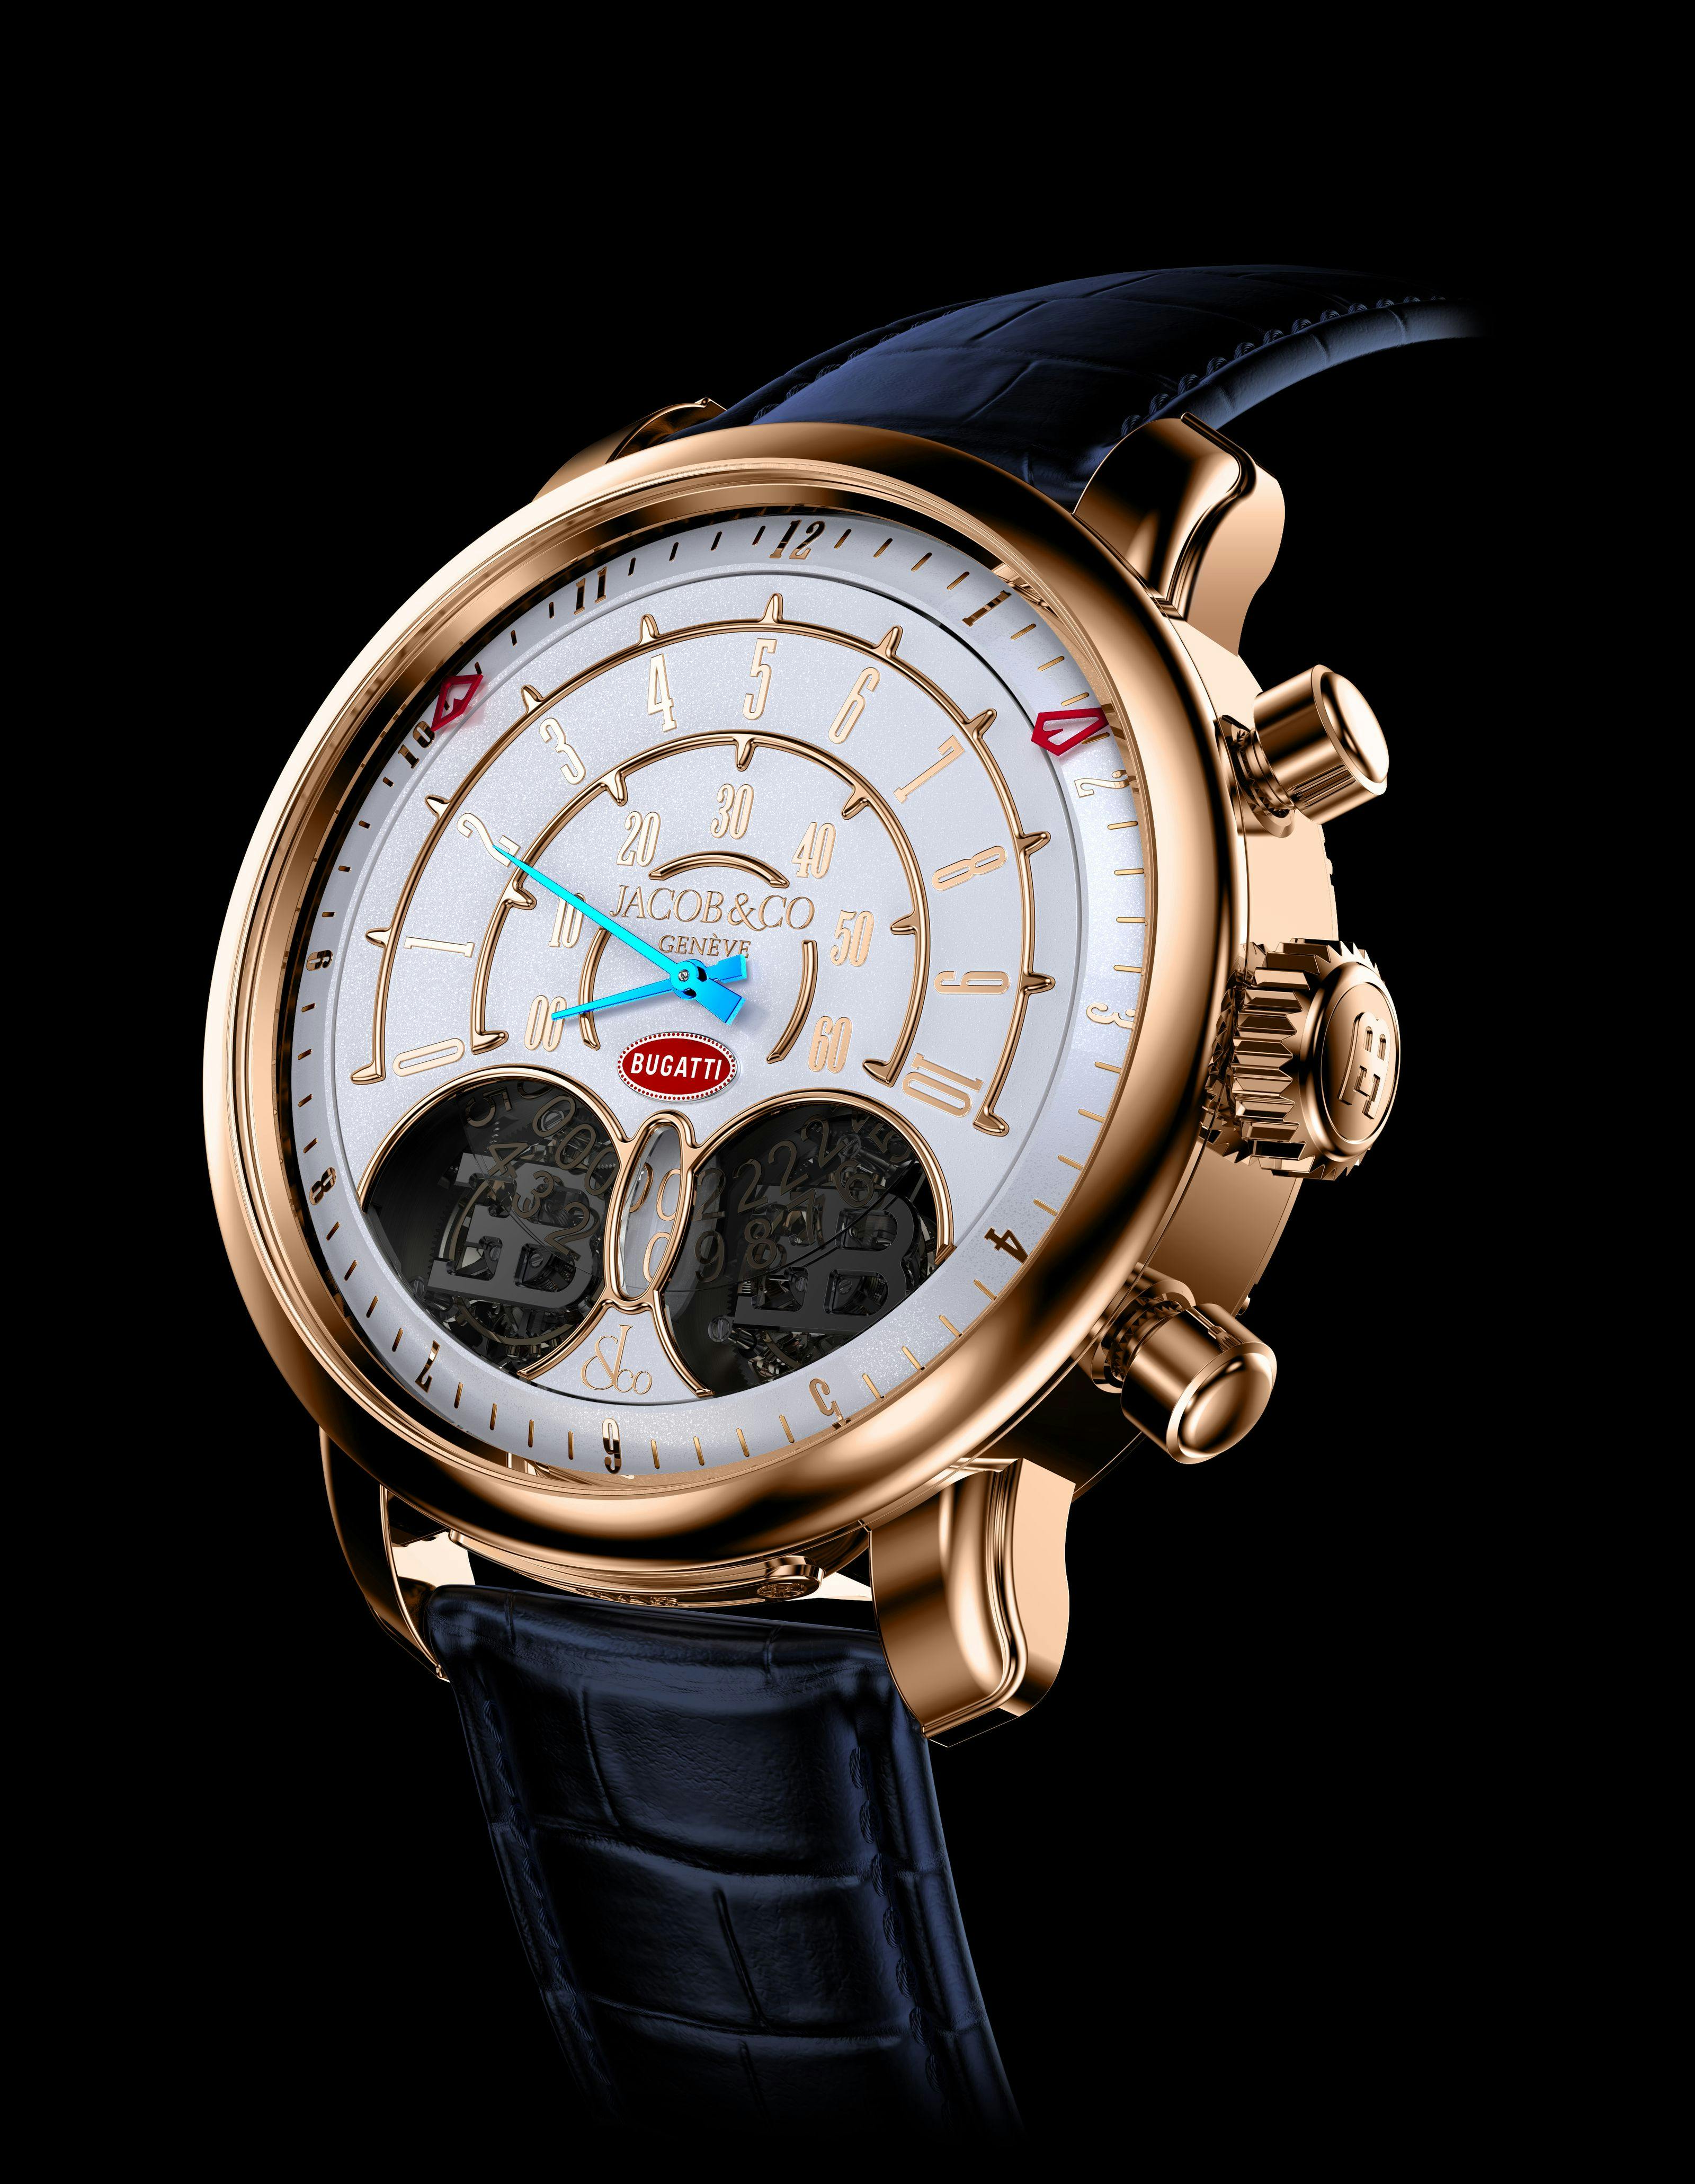 Encapsulating History and Innovation: The Jean Bugatti Timepiece